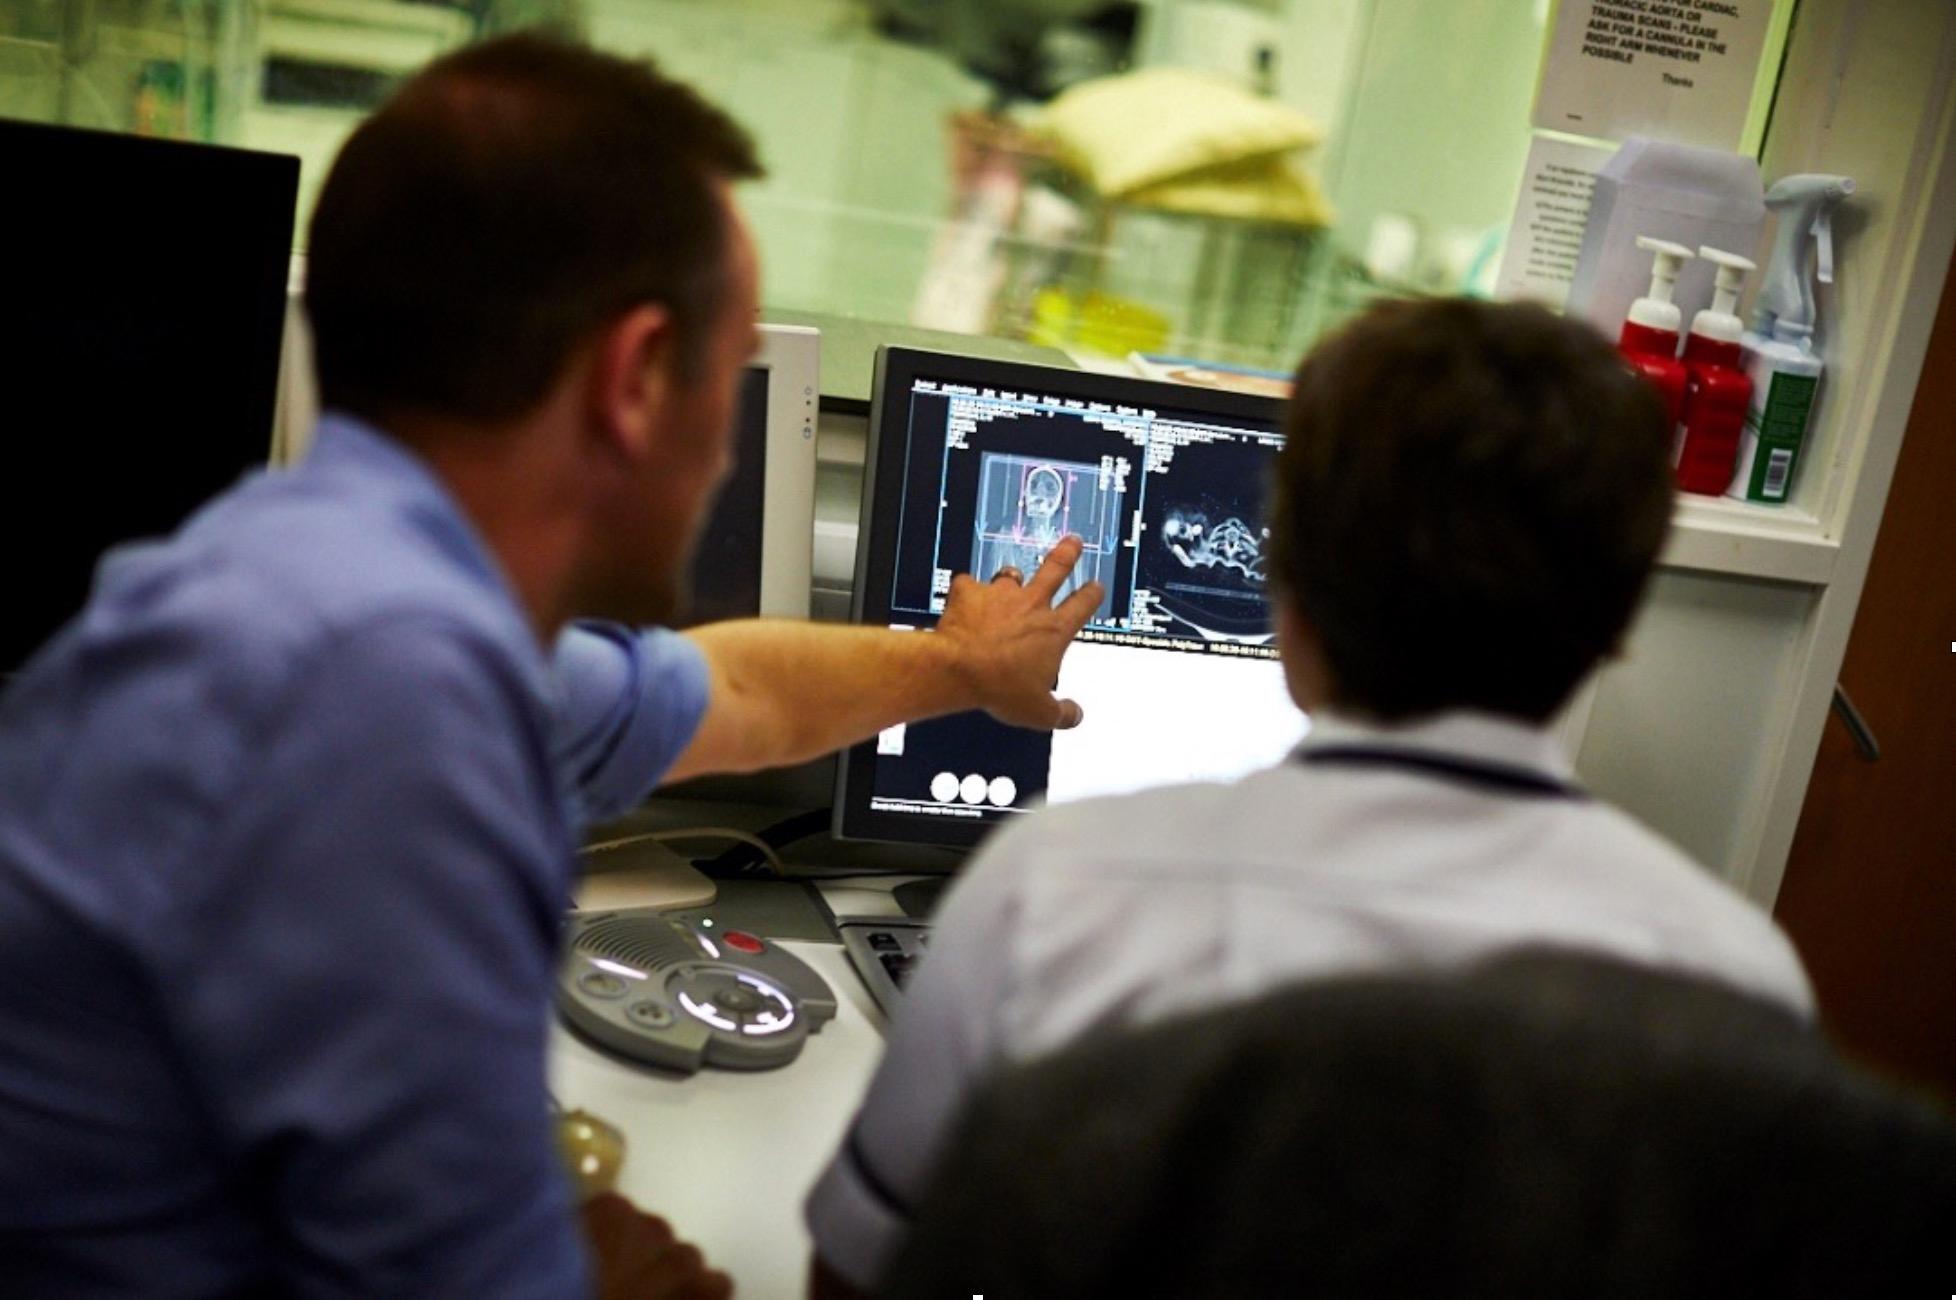 Gareth Iball of Medical Physics Department in Leeds performs a high-resolution CT scan